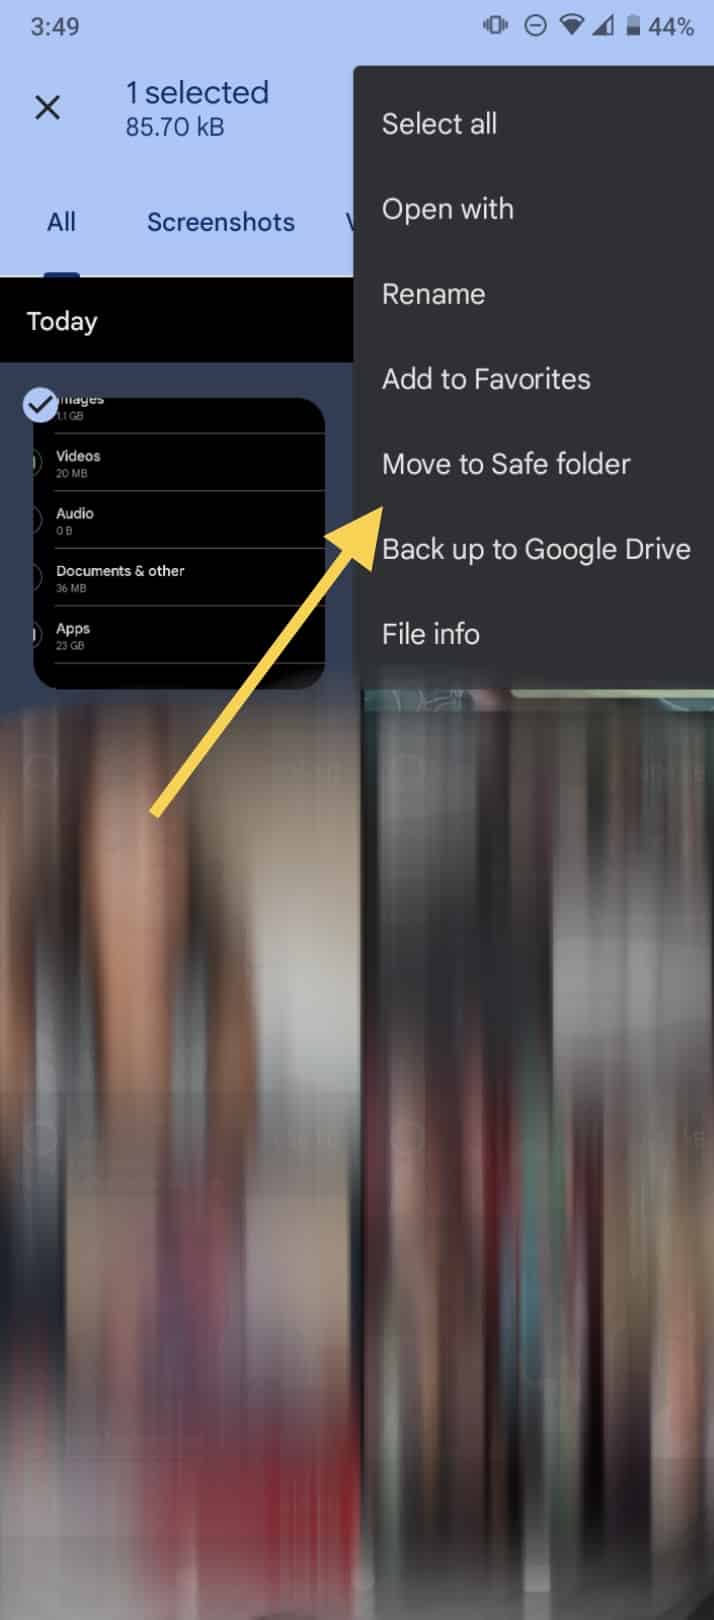 How to move pictures from one folder to another on Android